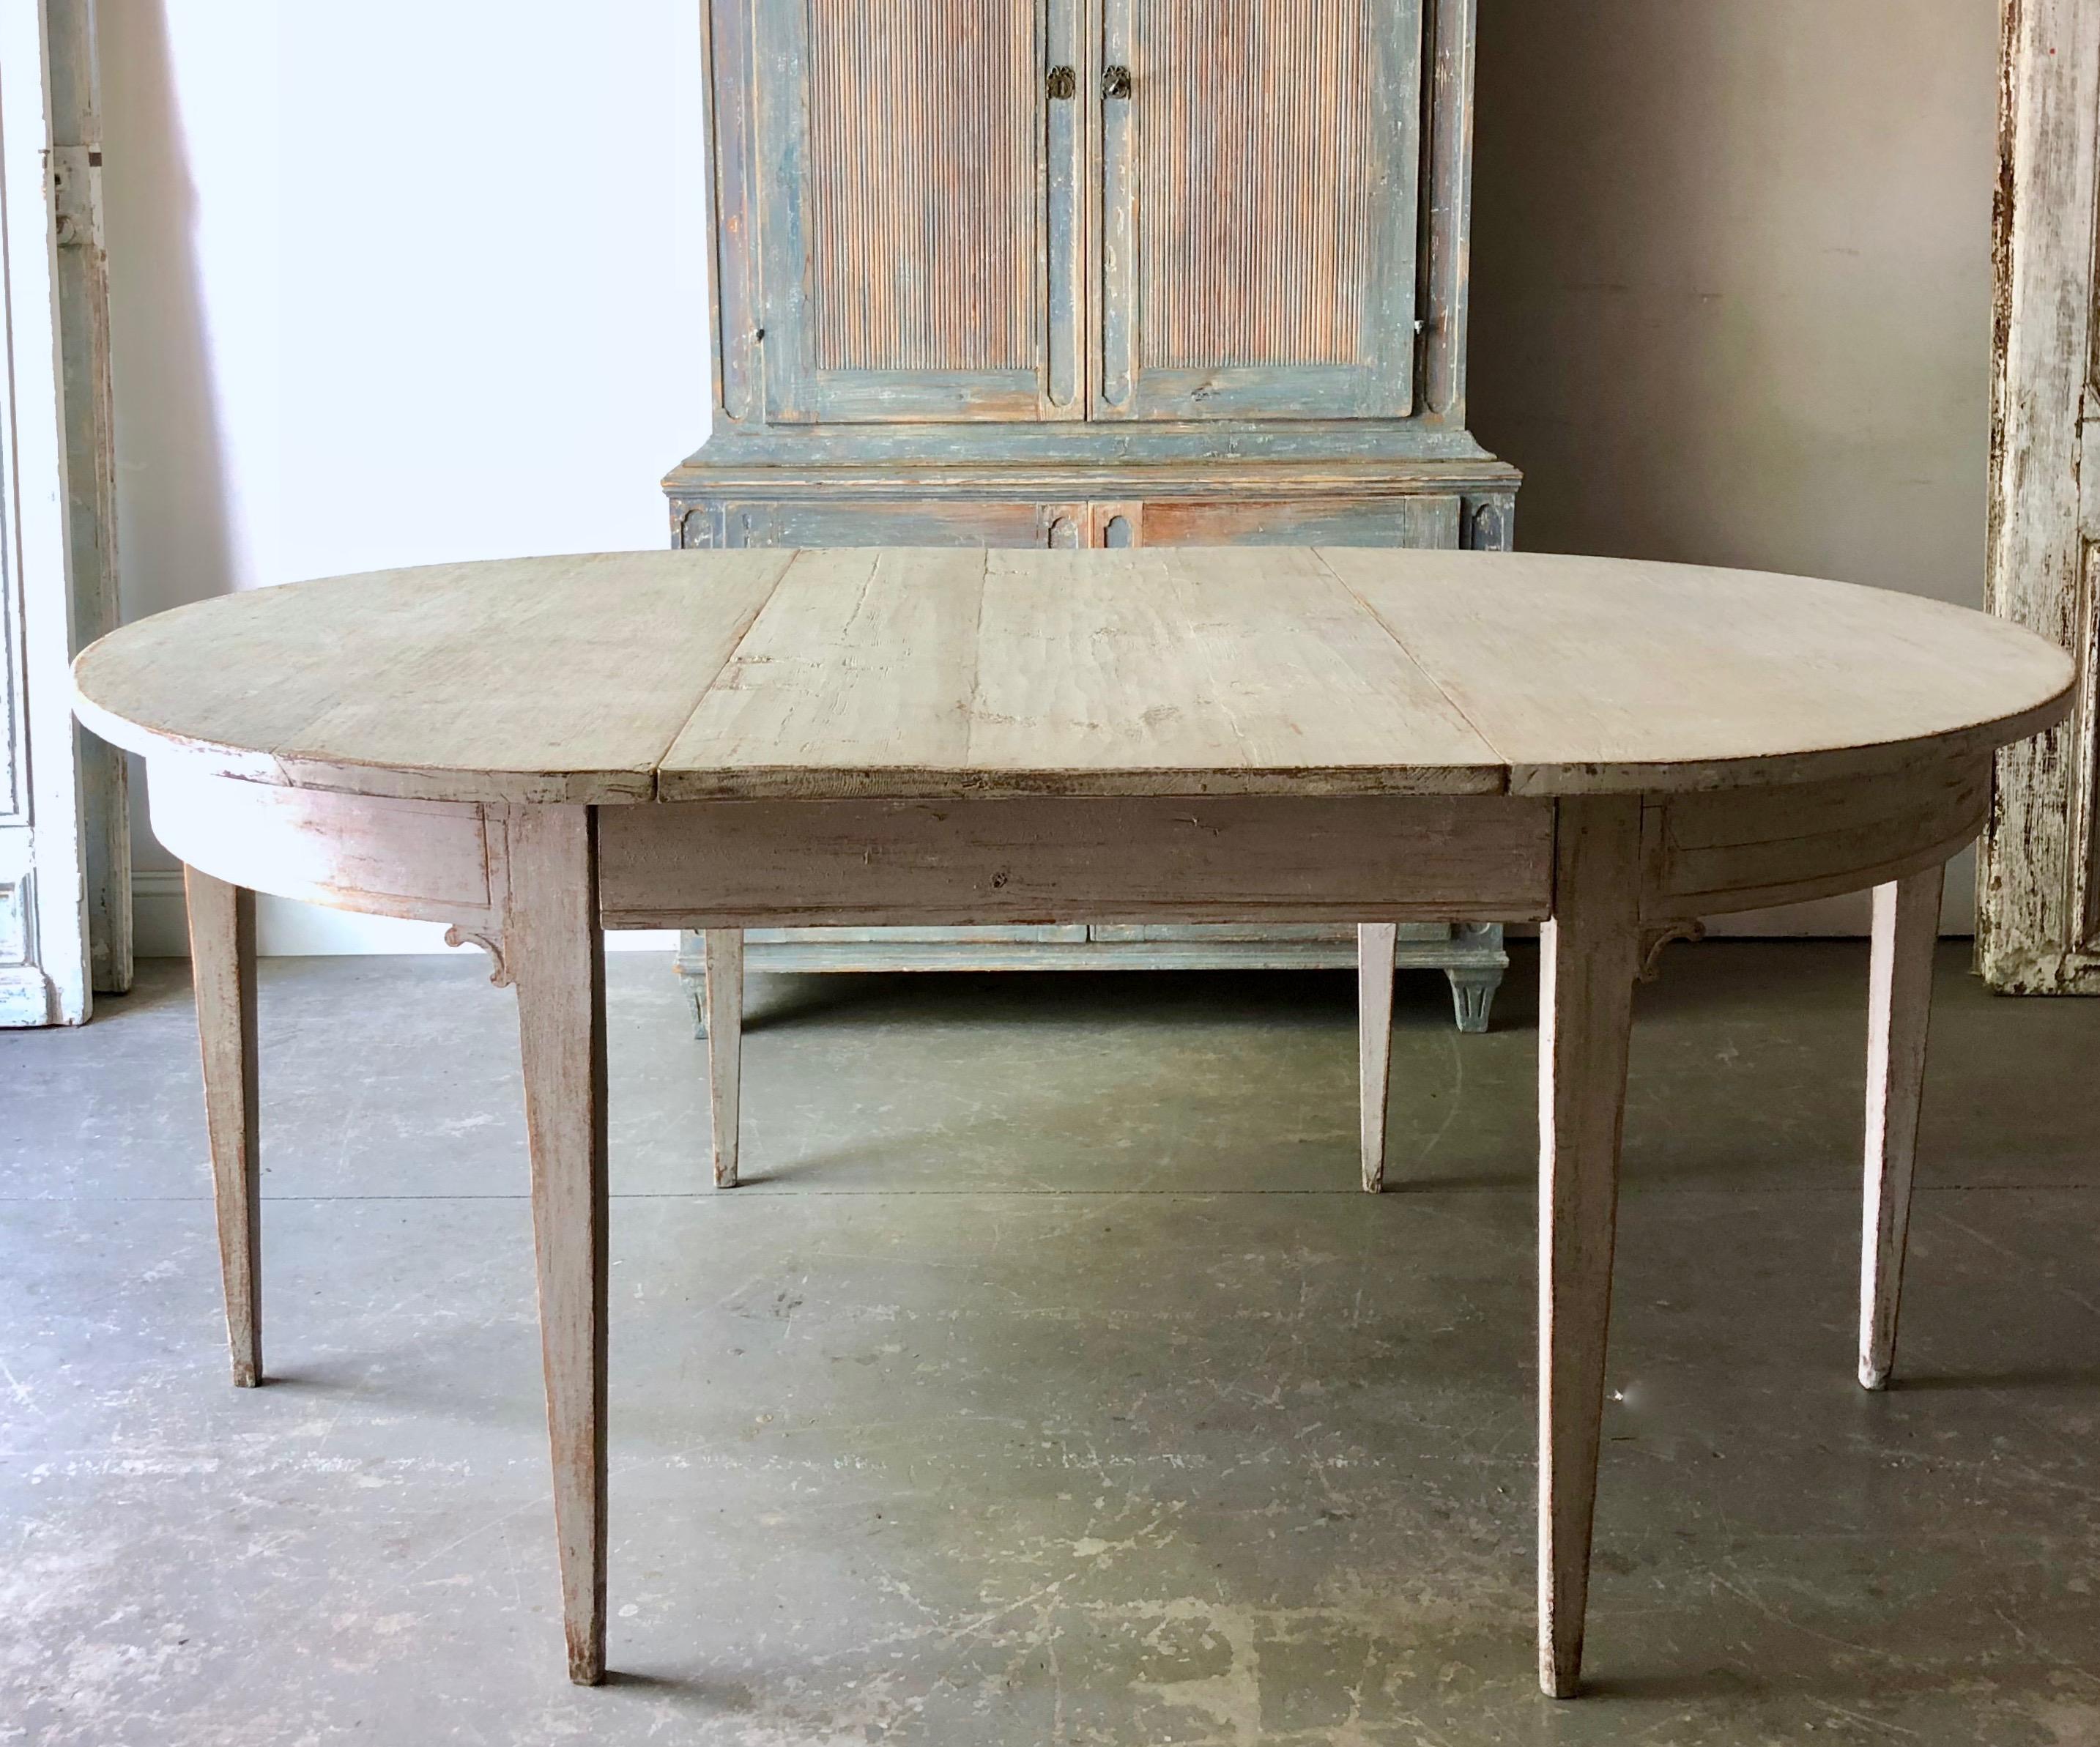 Early 19th century painted Gustavian period extending table with two leaves and tapered legs. A practical piece that can be used as round table or extended with one or two leaves up to 92